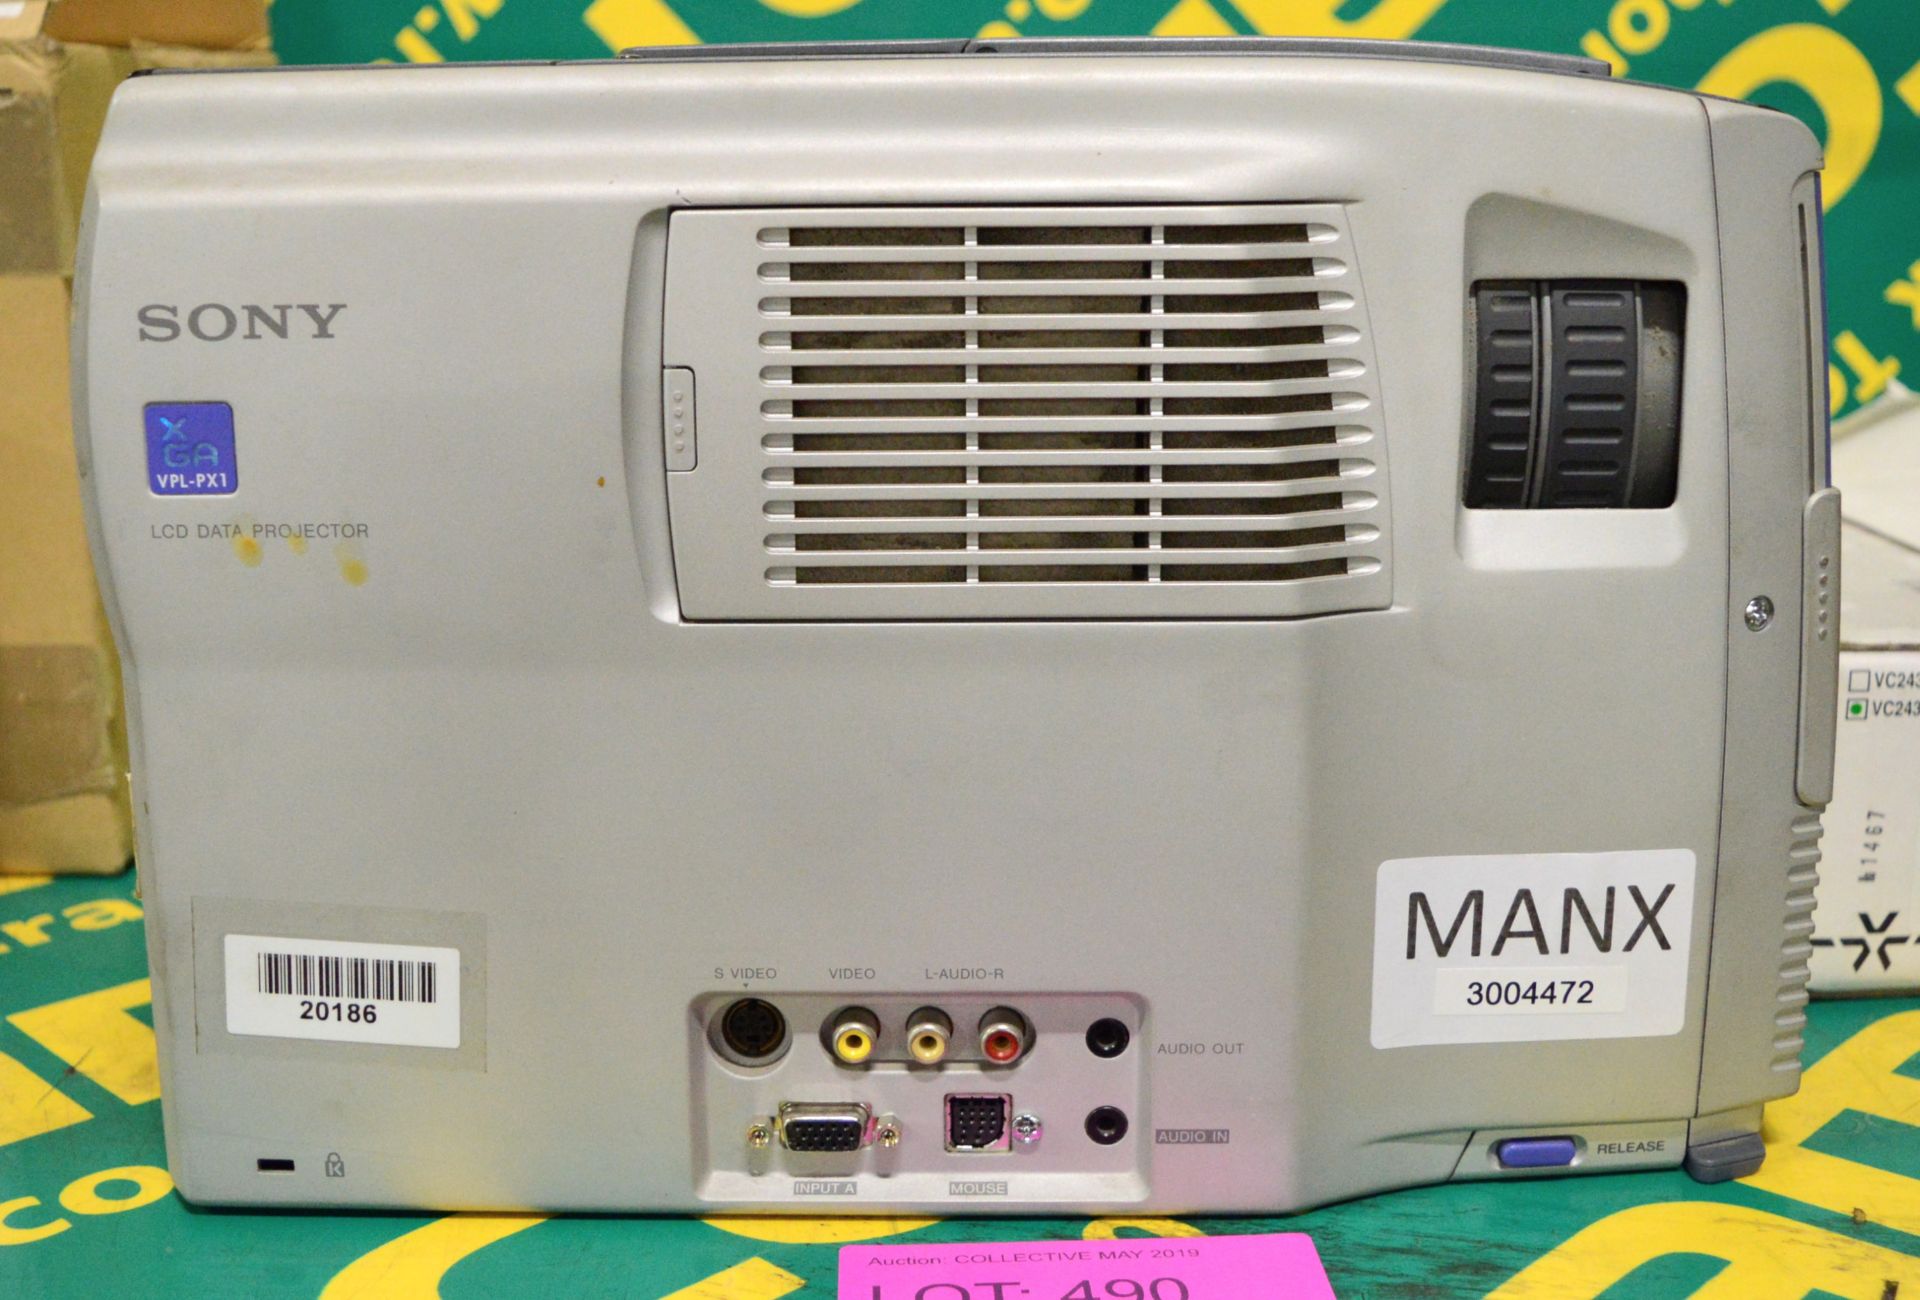 Sony VPL-PX1 LCD Projector.